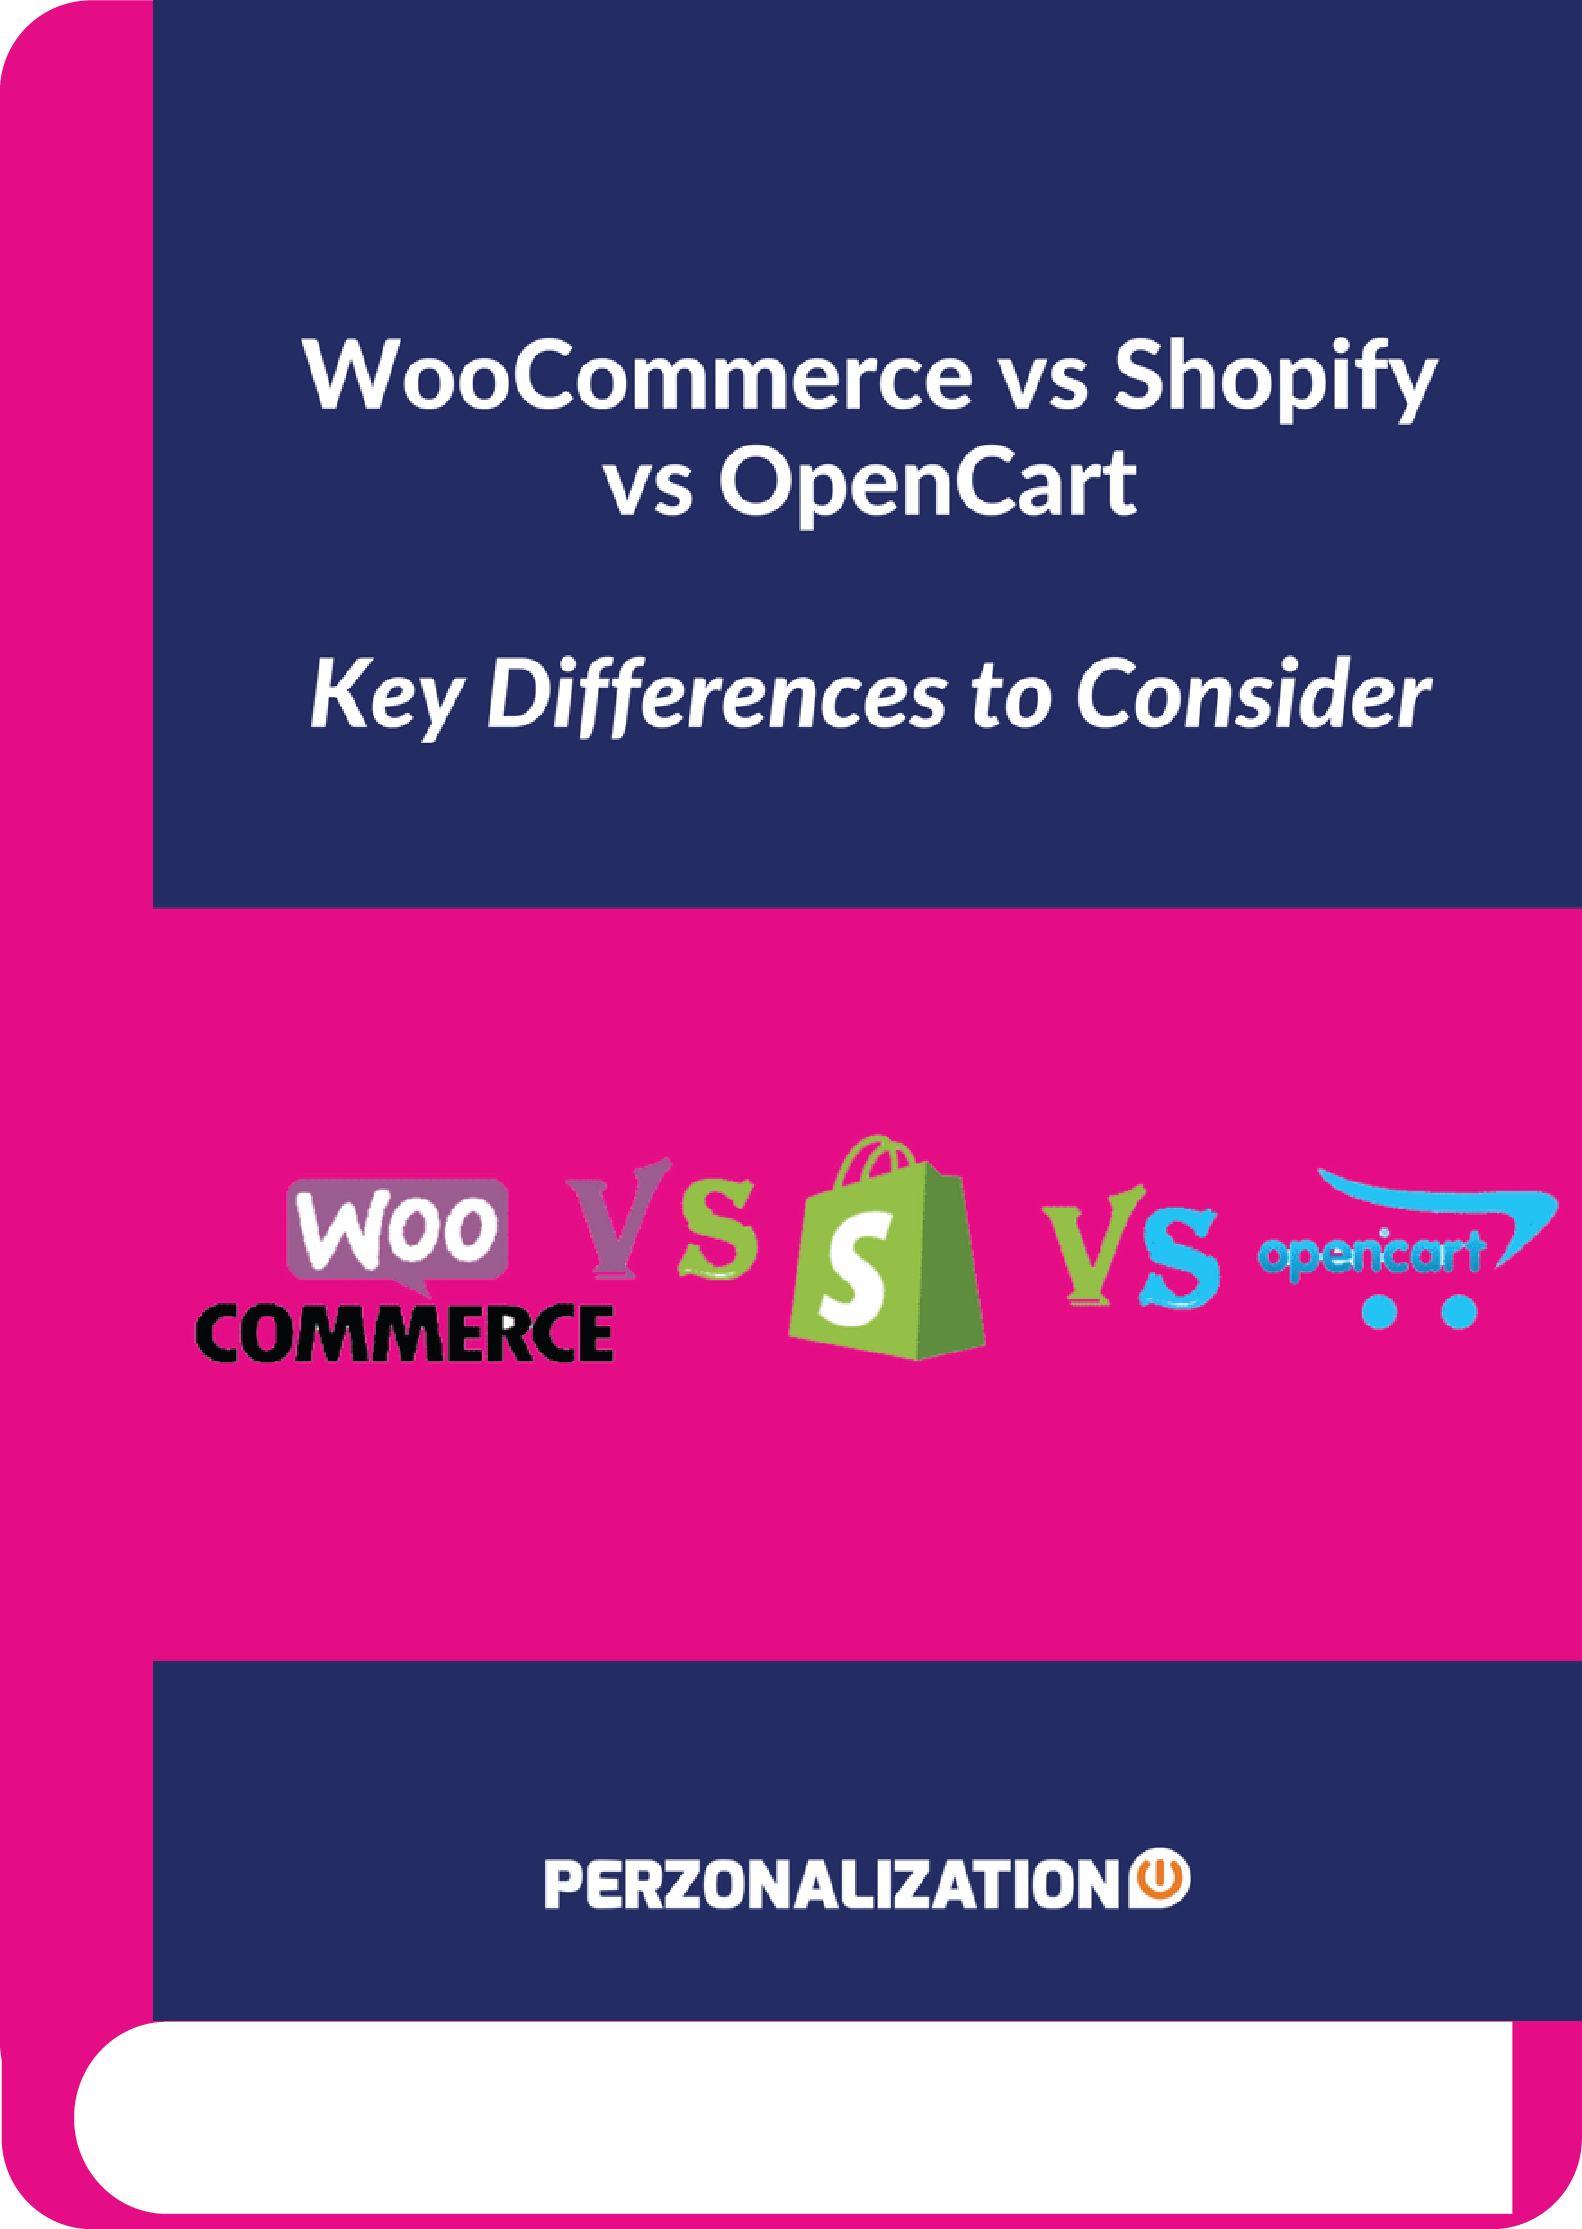 WooCommerce vs Shopify vs OpenCart seems like a tough choice to make. Find out which one will benefit your business the most.